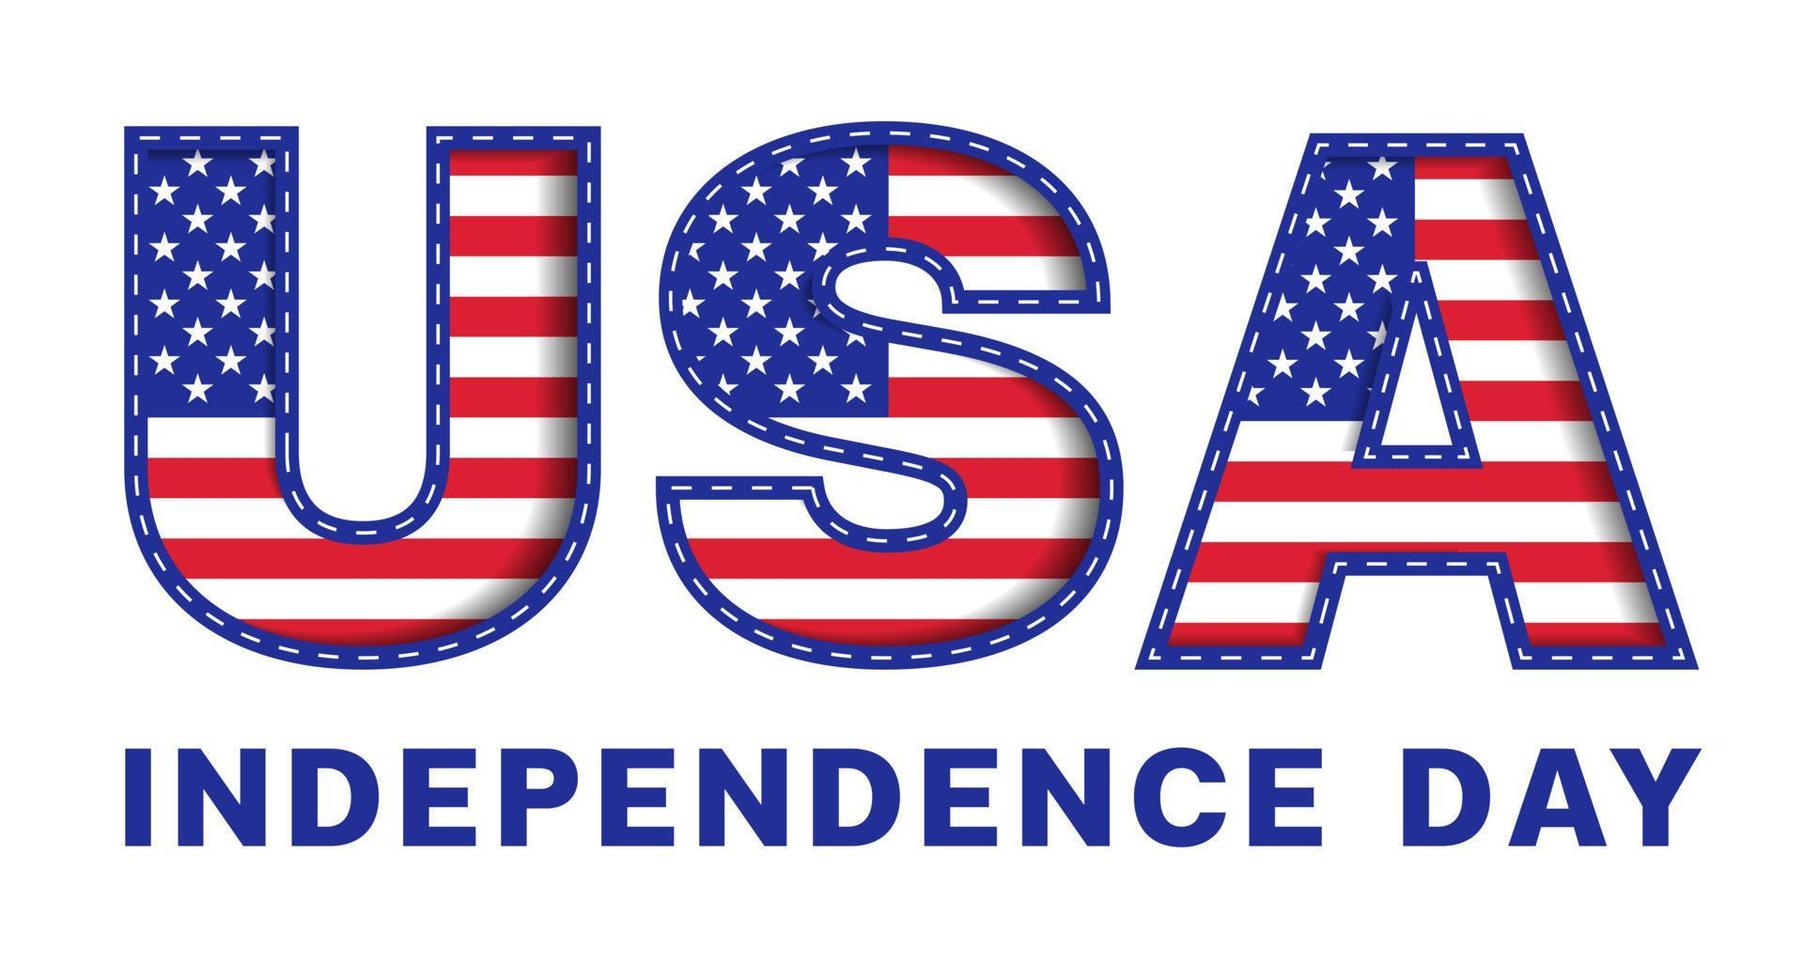 USA Independence Day United States of America Word Character Font Capital Letter Blue Navy Red Star Stripes  National Flag White Background 3D Paper Cutout  Vector Illustration